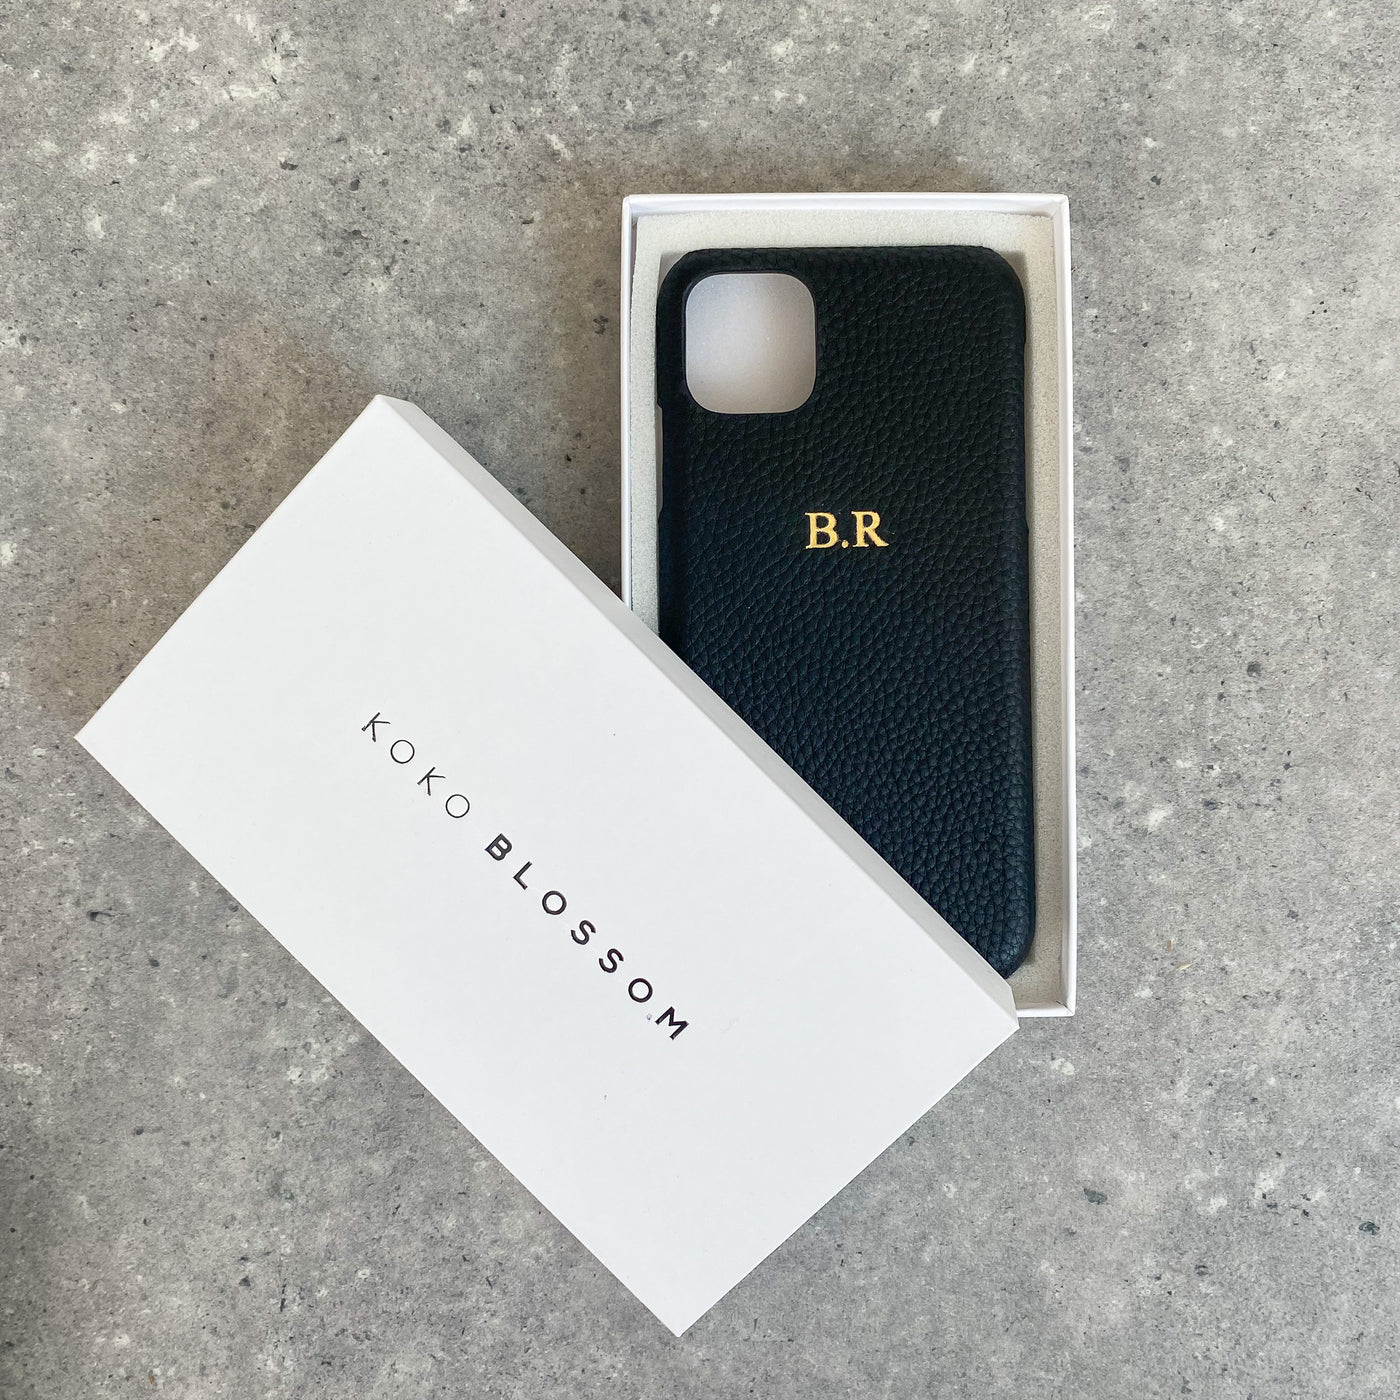 Black pebble leather phone case with embossed initials in a gift box